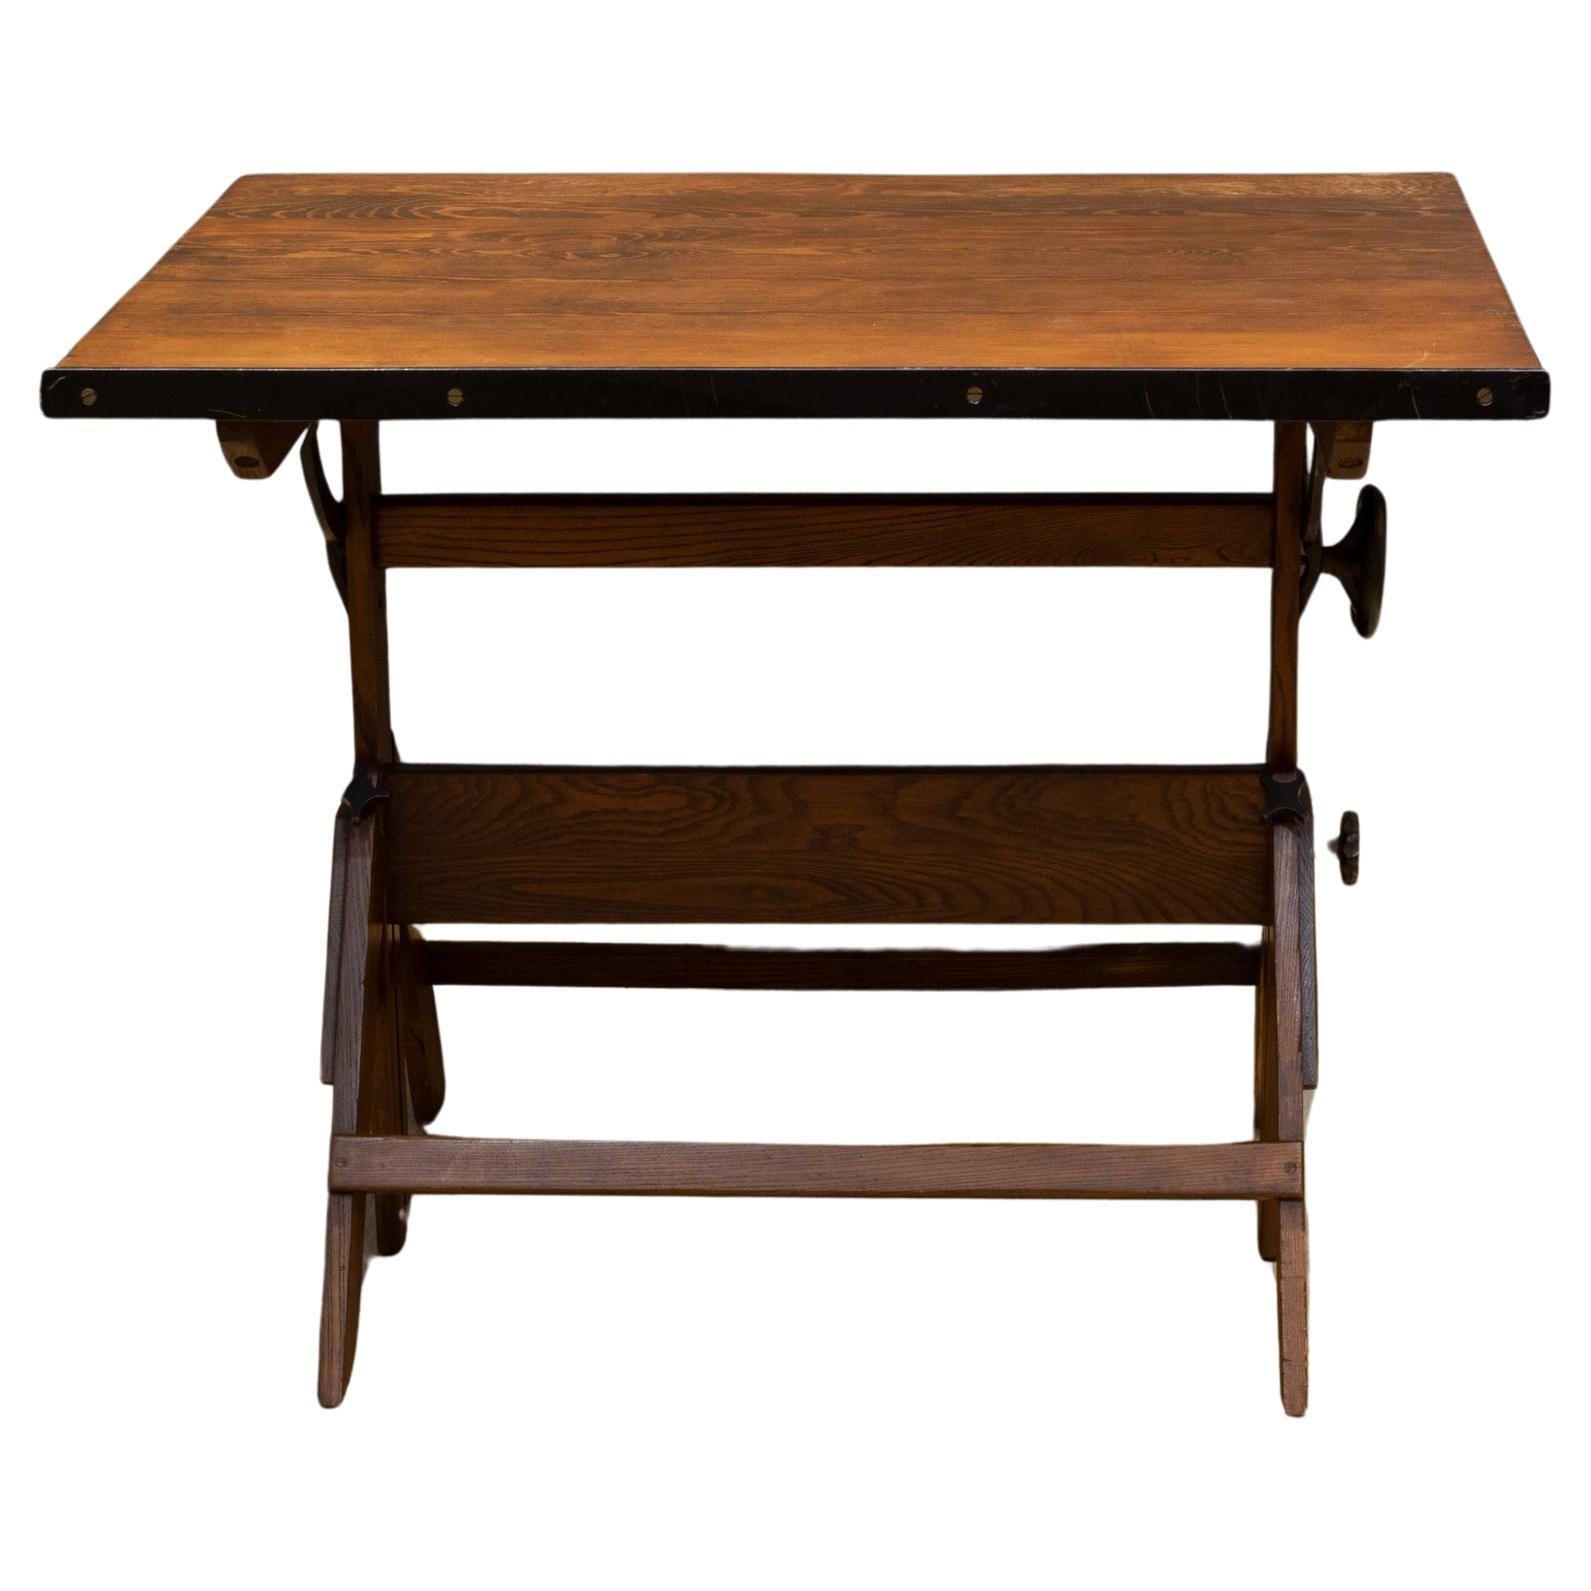 Vintage Anco Bilt Cast Iron and Wood Drafting Table/Desk c.1950 For Sale